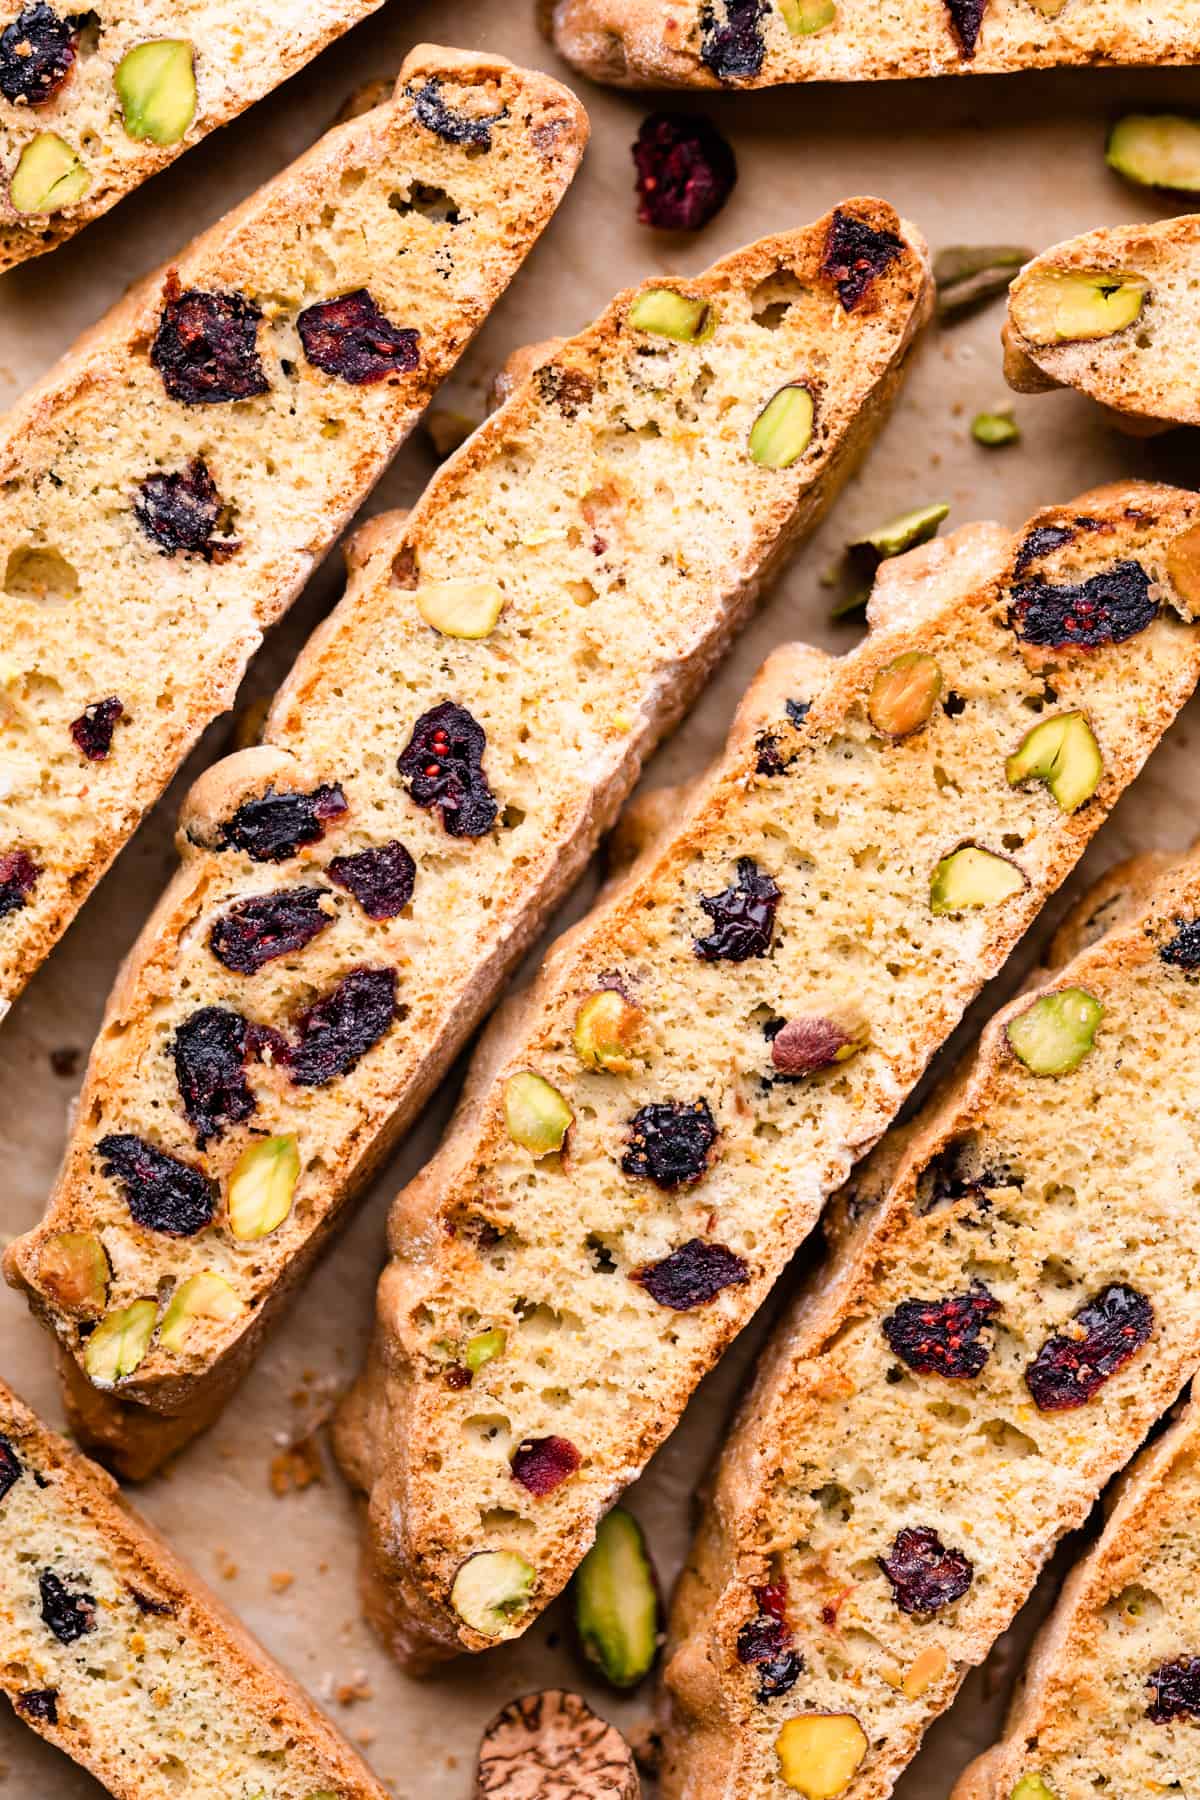 biscotti slices stuffed with dried cranberries and pistachios arranged next to each other.